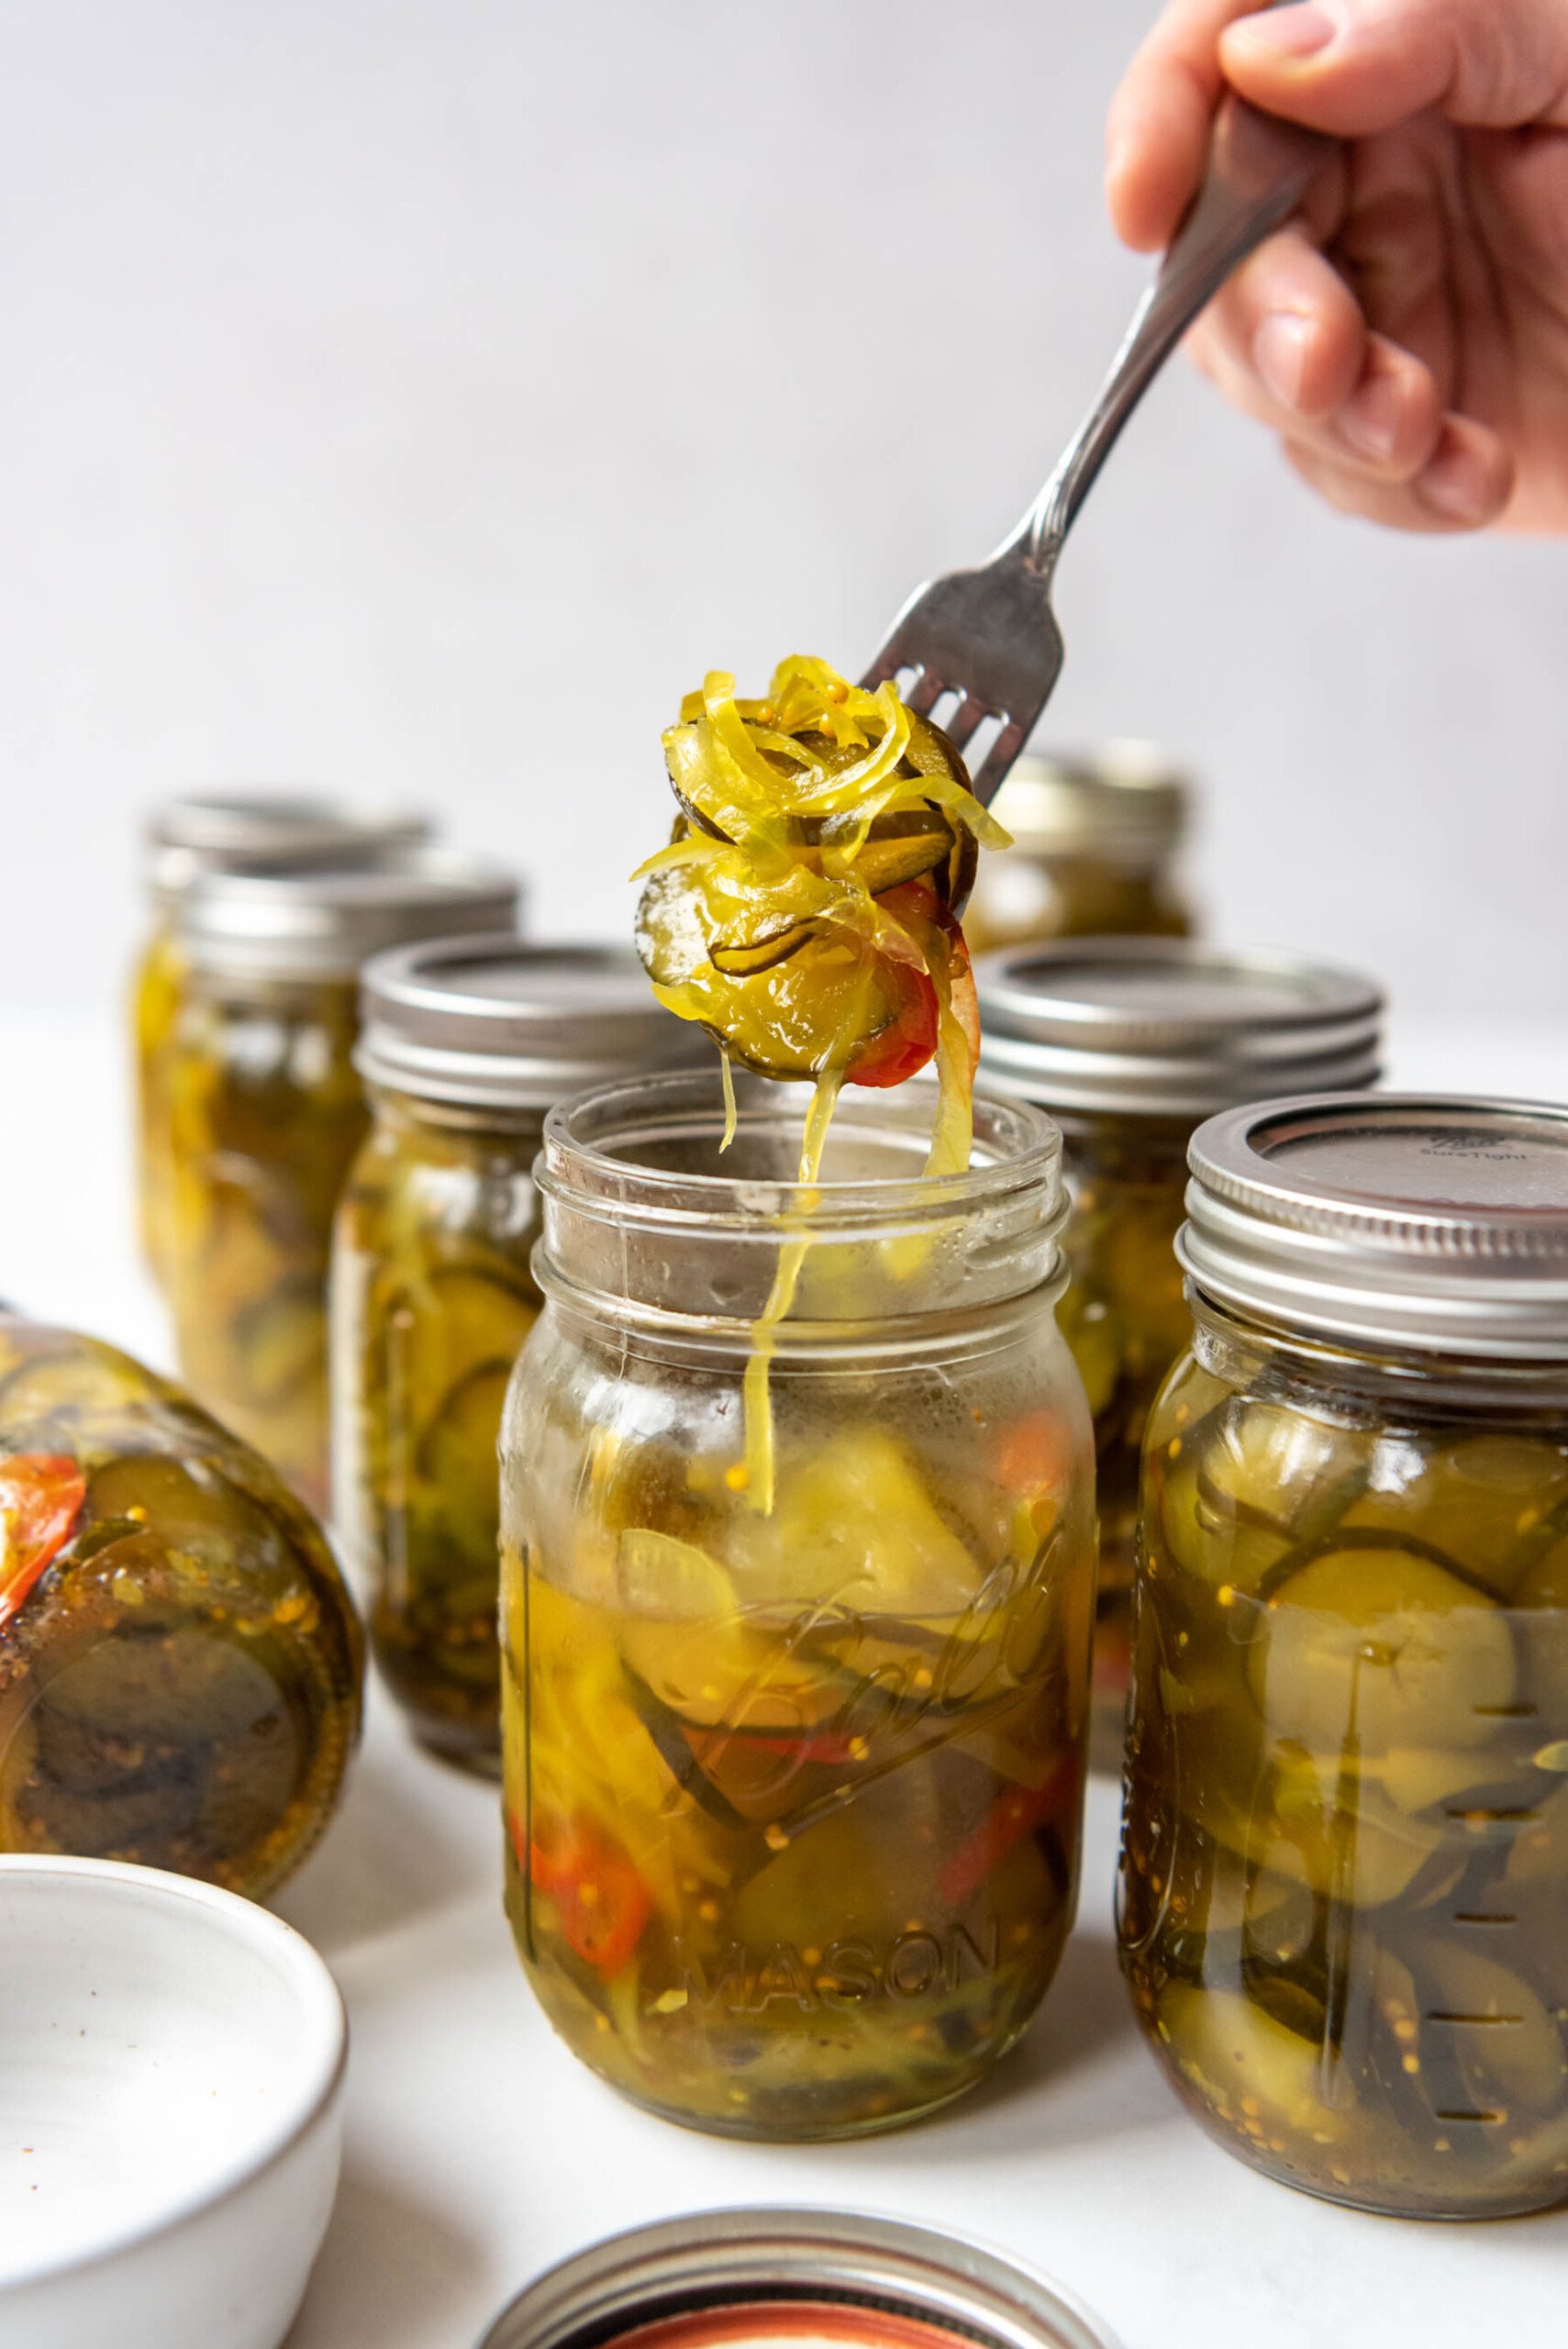 A hand lifting a forkful of bread and butter pickles out of a jar.